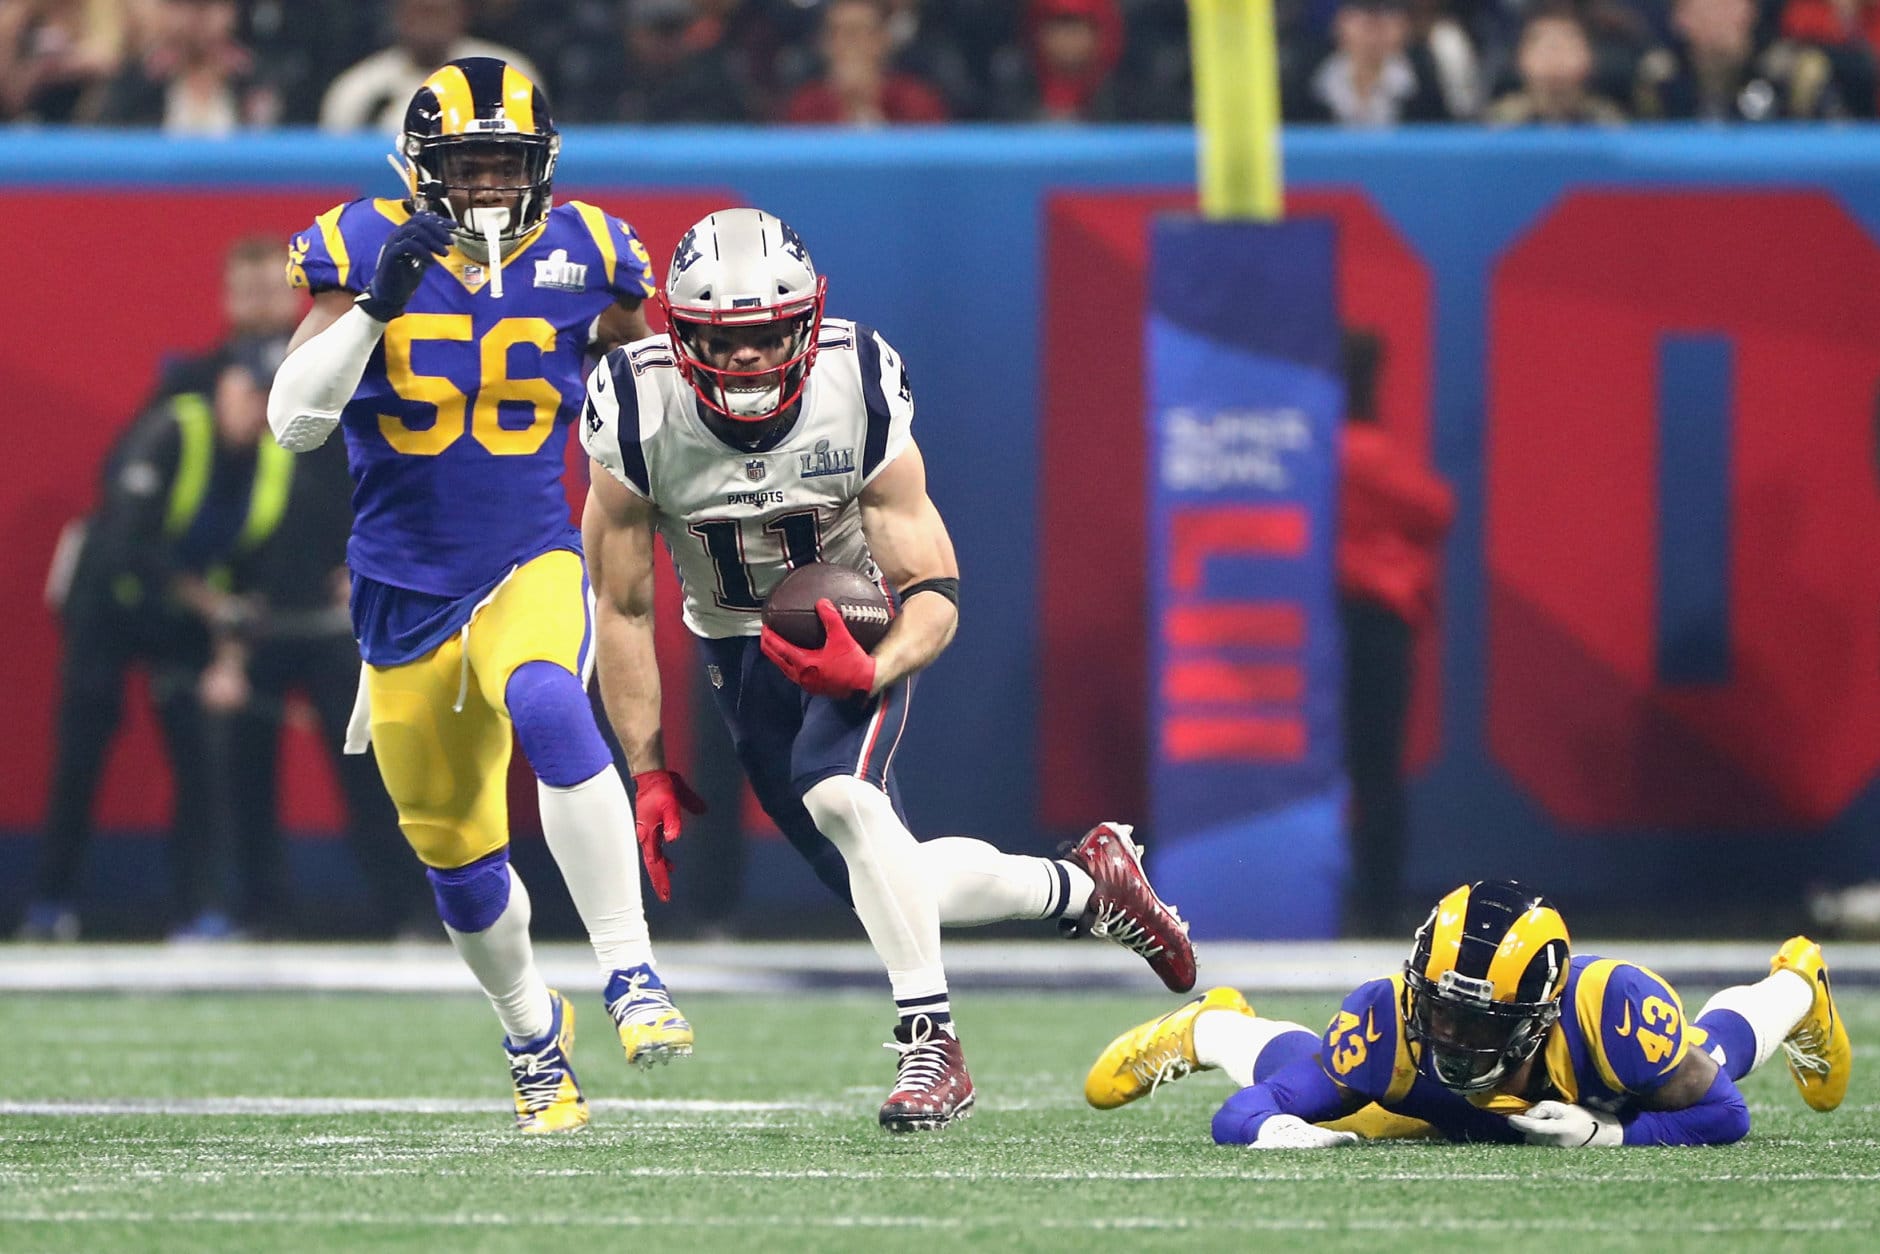 ATLANTA, GA - FEBRUARY 03: Julian Edelman #11 of the New England Patriots runs with the ball against the Los Angeles Rams in the second half during Super Bowl LIII at Mercedes-Benz Stadium on February 3, 2019 in Atlanta, Georgia.  (Photo by Jamie Squire/Getty Images)